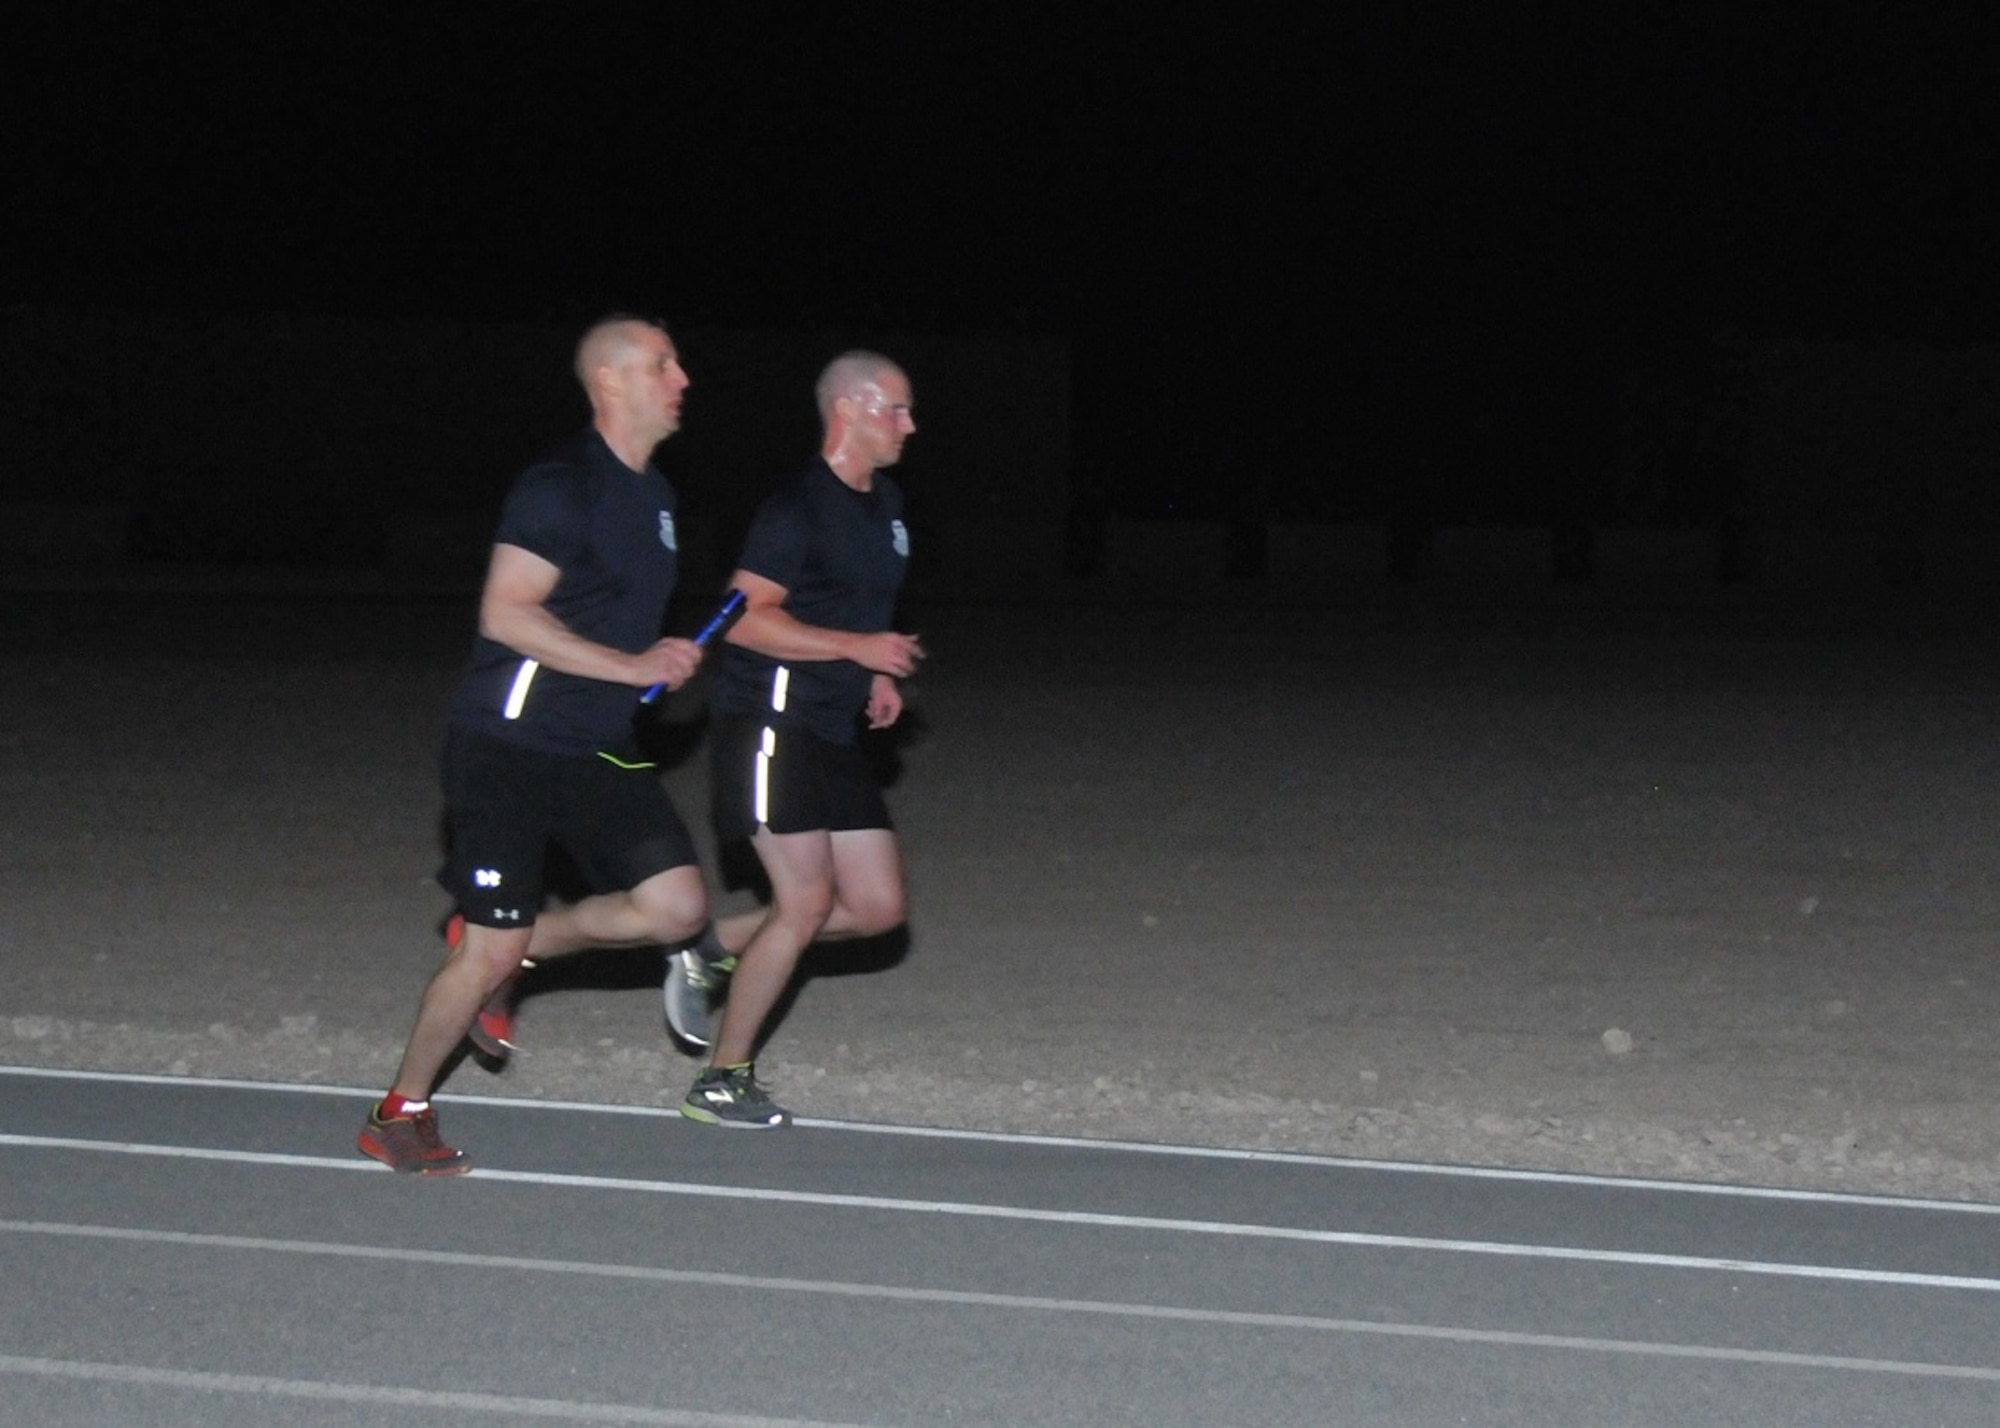 Personnel from the Air Force Office of Special Investigations’ 24th Expeditionary Field Investigations Squadron and Detachment 241, Al Udeid Air Base, Qatar, completed an 80-kilometer Memorial Relay Run in honor of AFOSI's Fallen Heroes from Operation Iraqi Freedom and Operation Enduring Freedom (Afghanistan).
Cumulatively, 17 participants covered the distance of slightly more than 51 miles in approximately seven hours and 10 minutes, April 26-27, 2015.